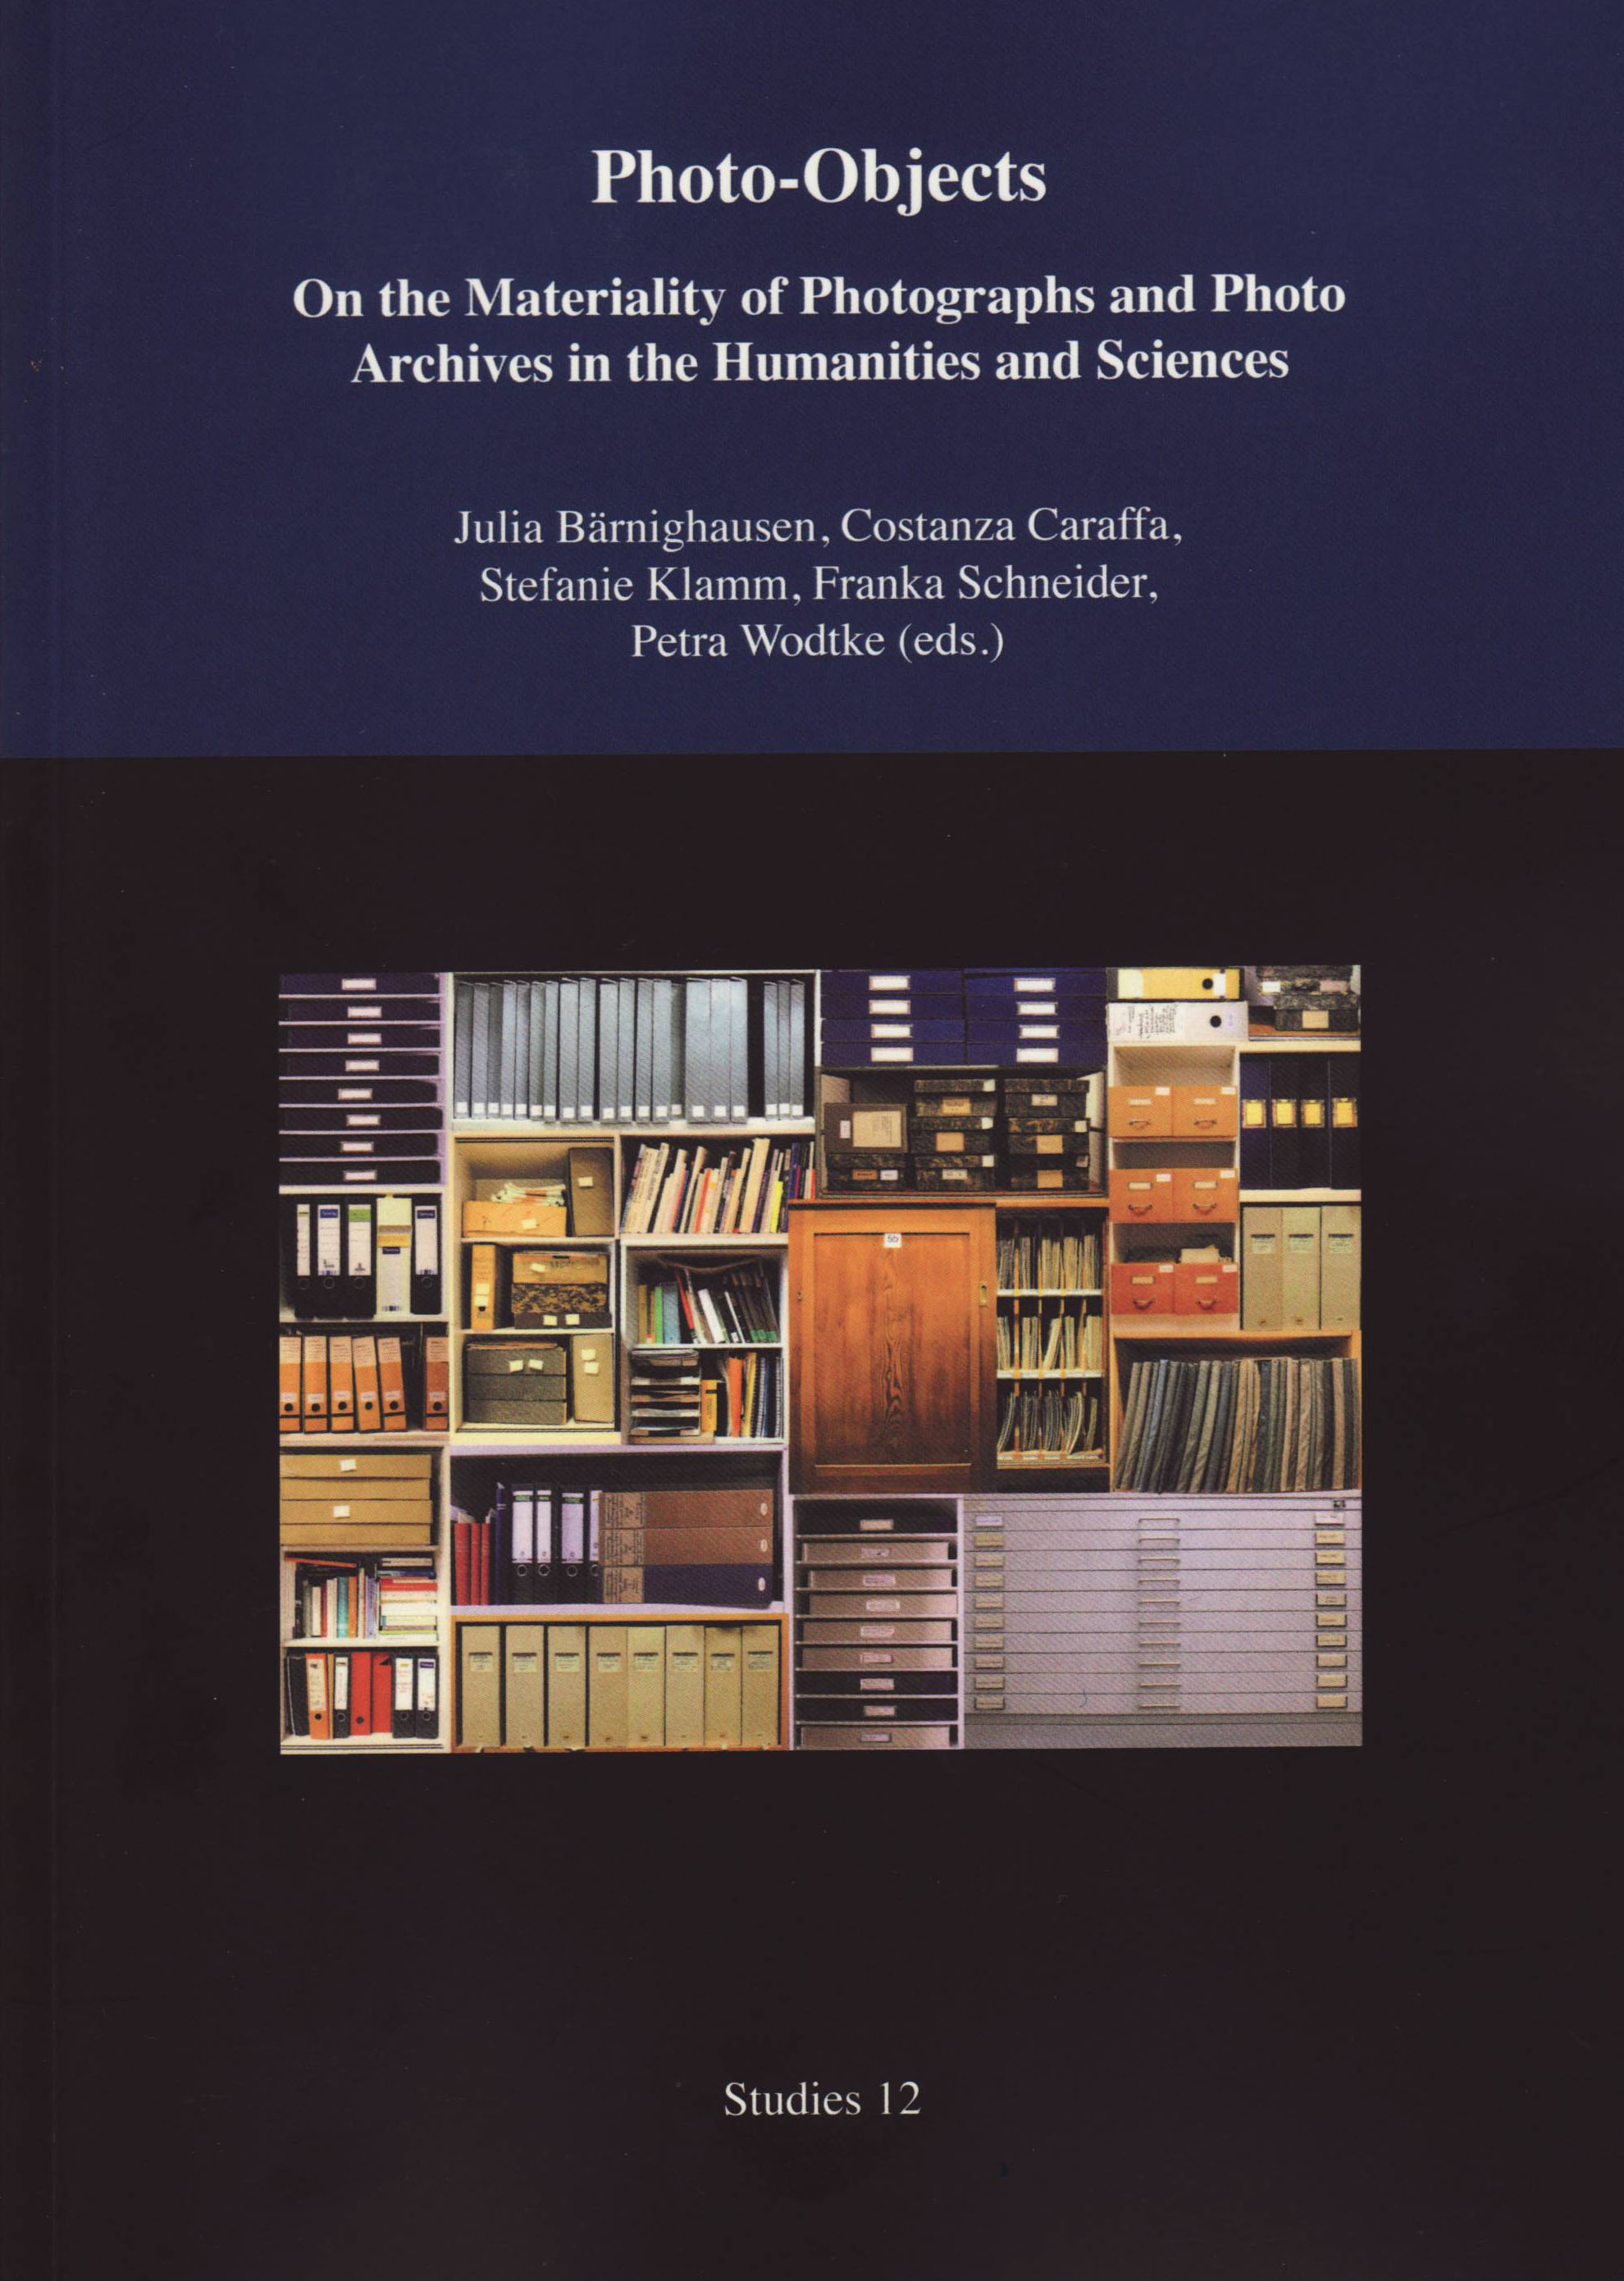 book cover: Caraffa et al: Photo-Objects. On the Materiality of Photographs and Photo Archives in the Humanities and Sciences (2019)